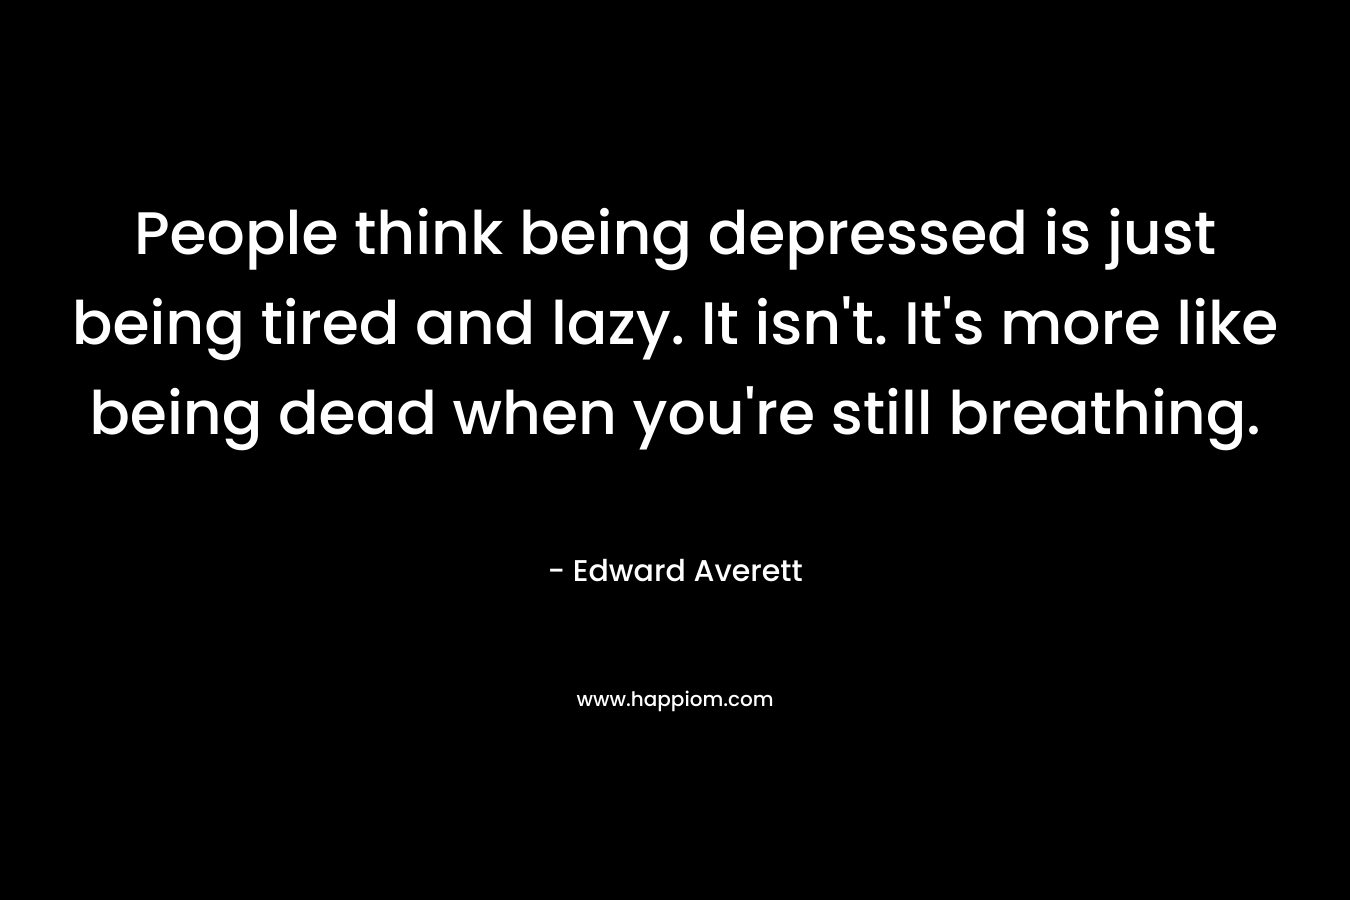 People think being depressed is just being tired and lazy. It isn’t. It’s more like being dead when you’re still breathing. – Edward Averett